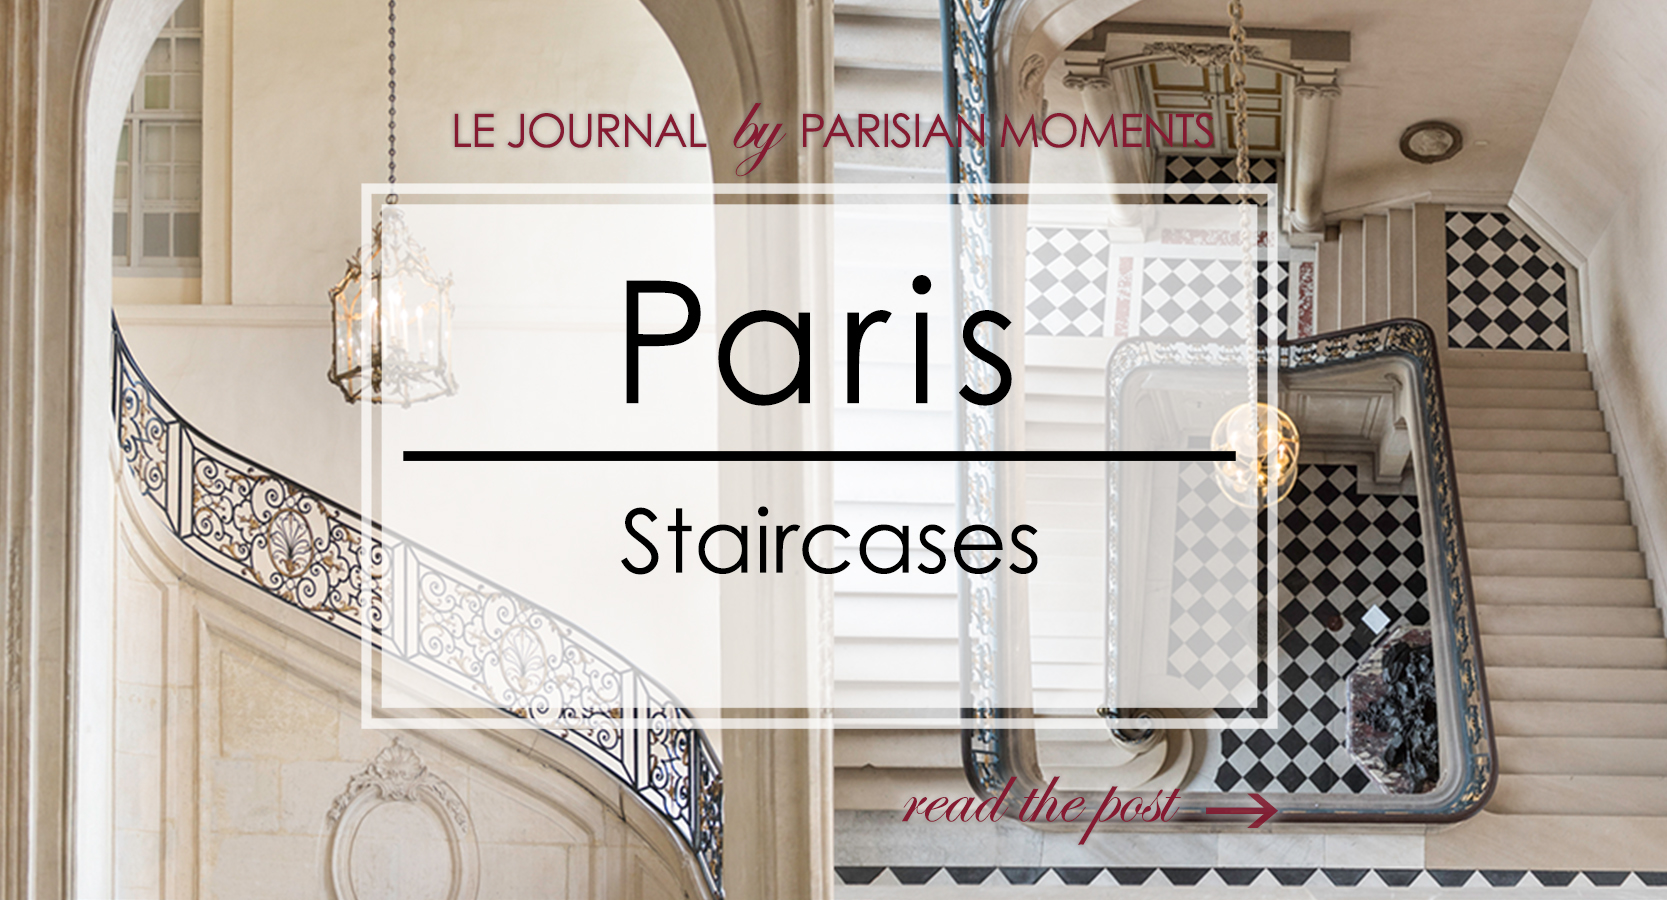 Staircases of Paris